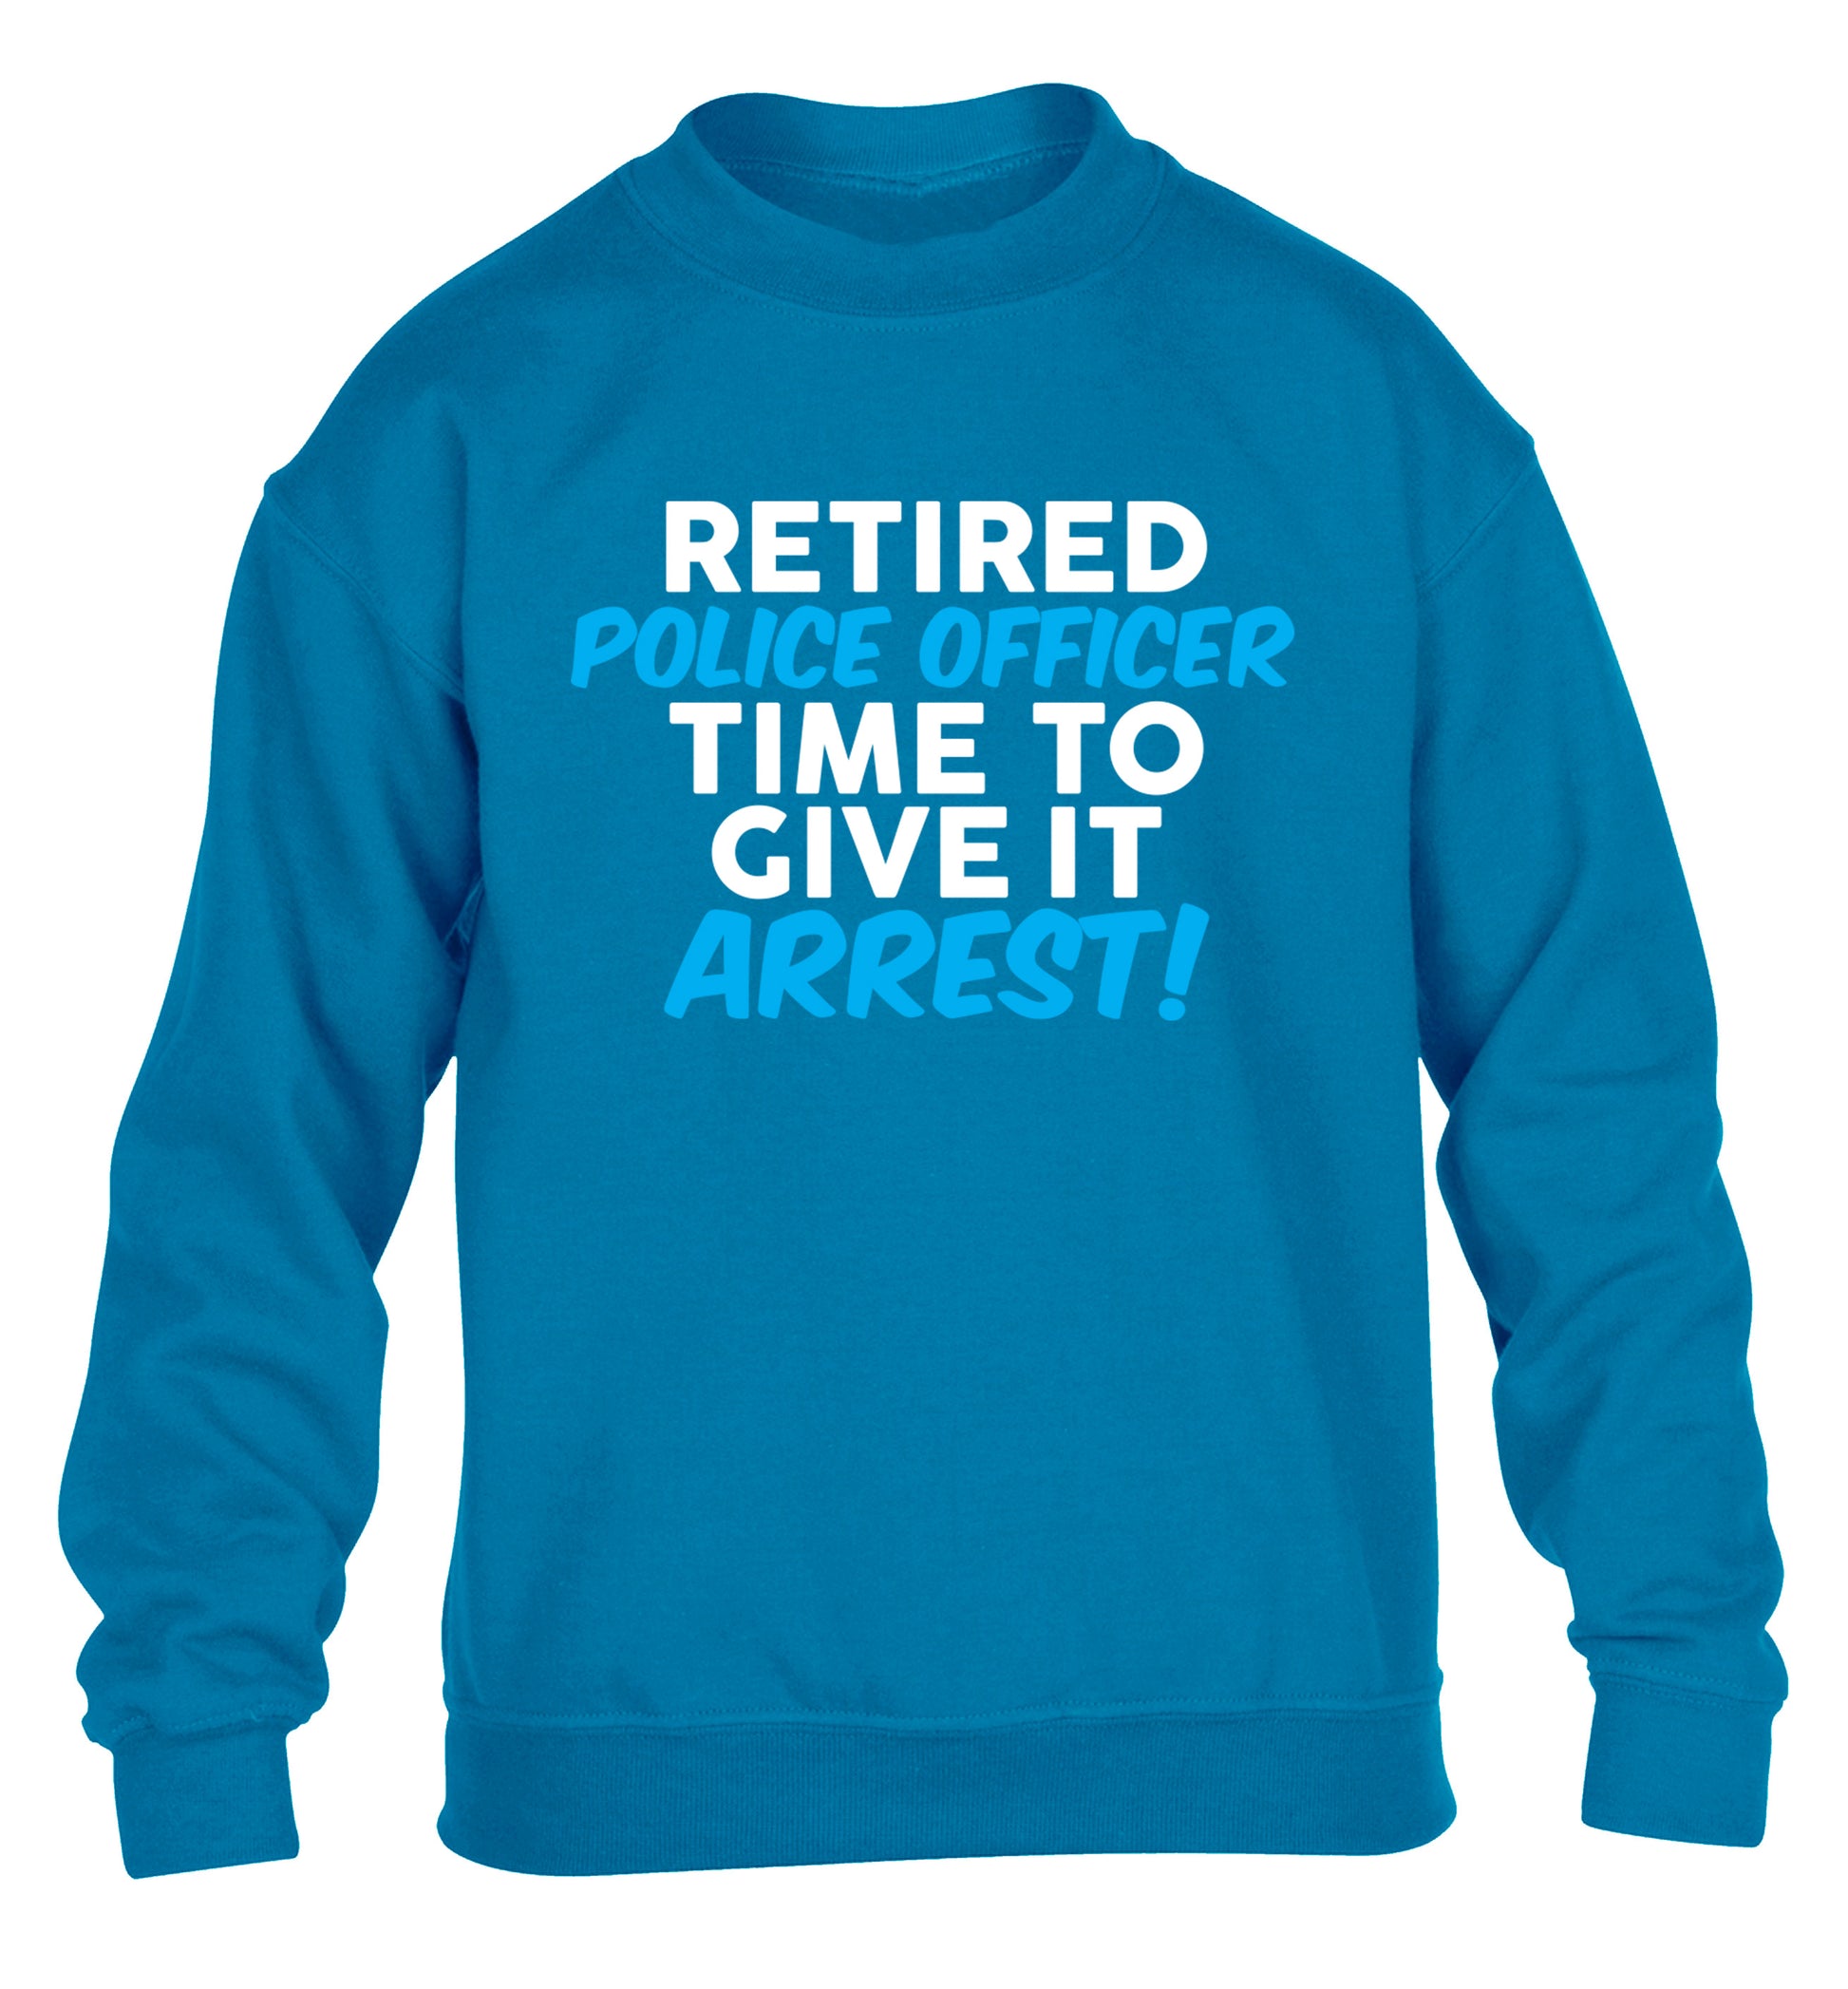 Retired police officer time to give it arrest children's blue sweater 12-13 Years